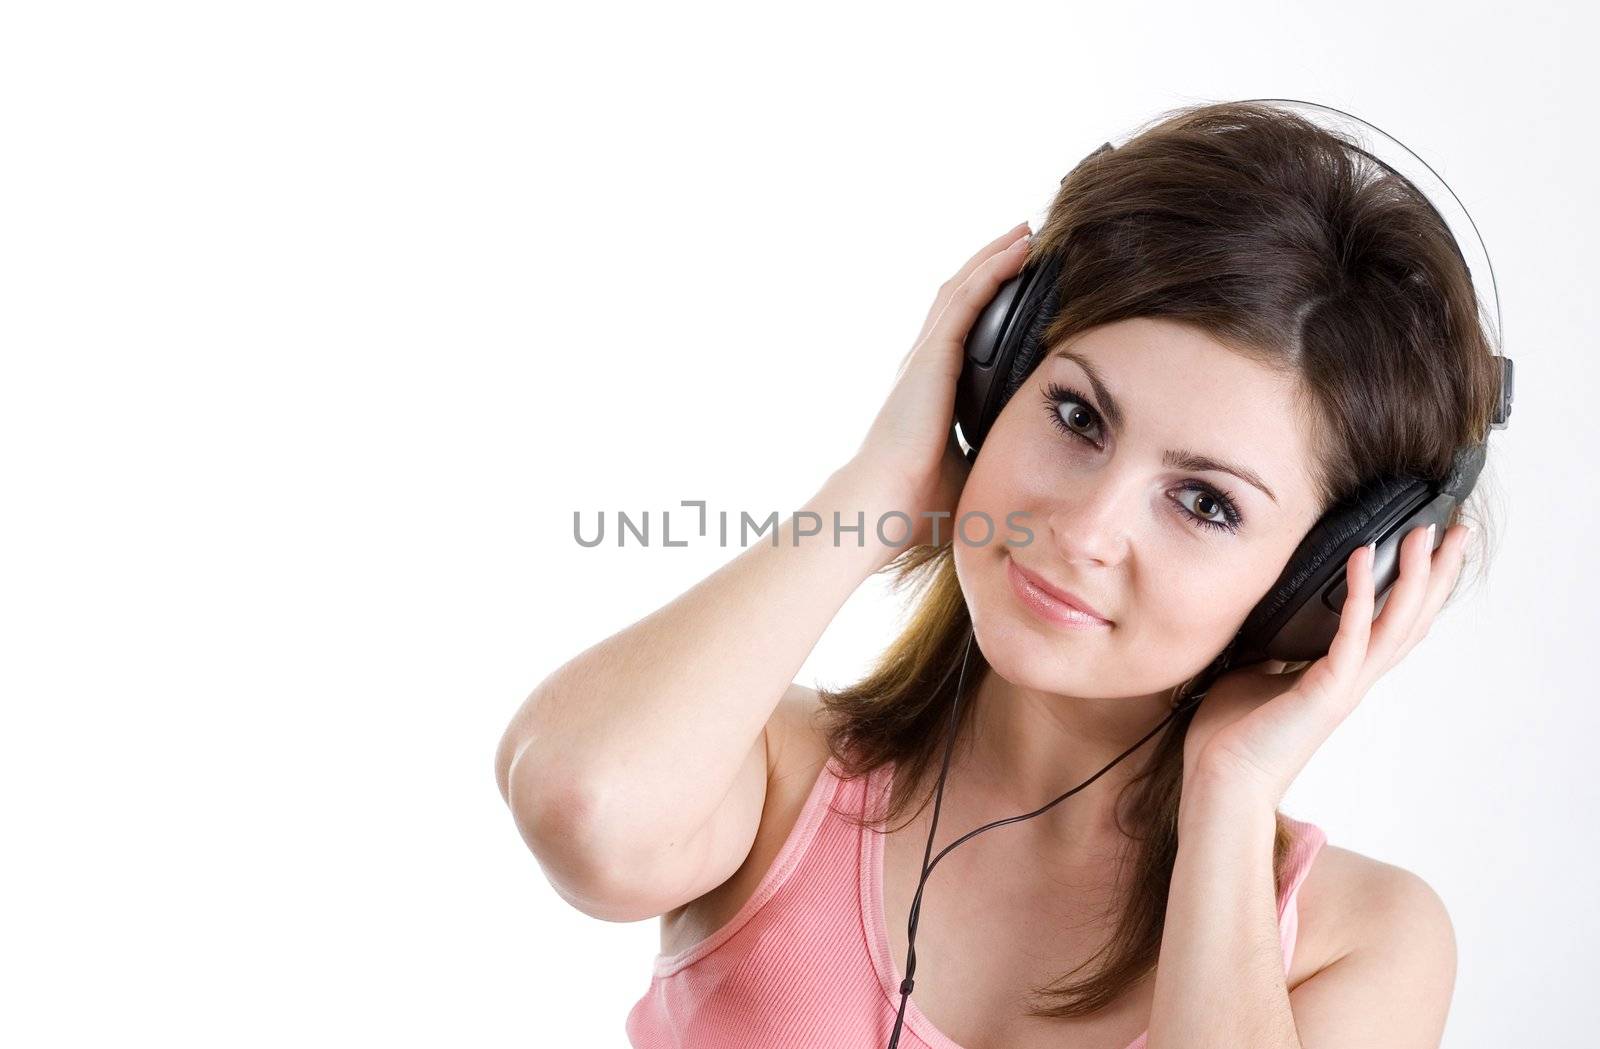 An image of woman in headphone on white background